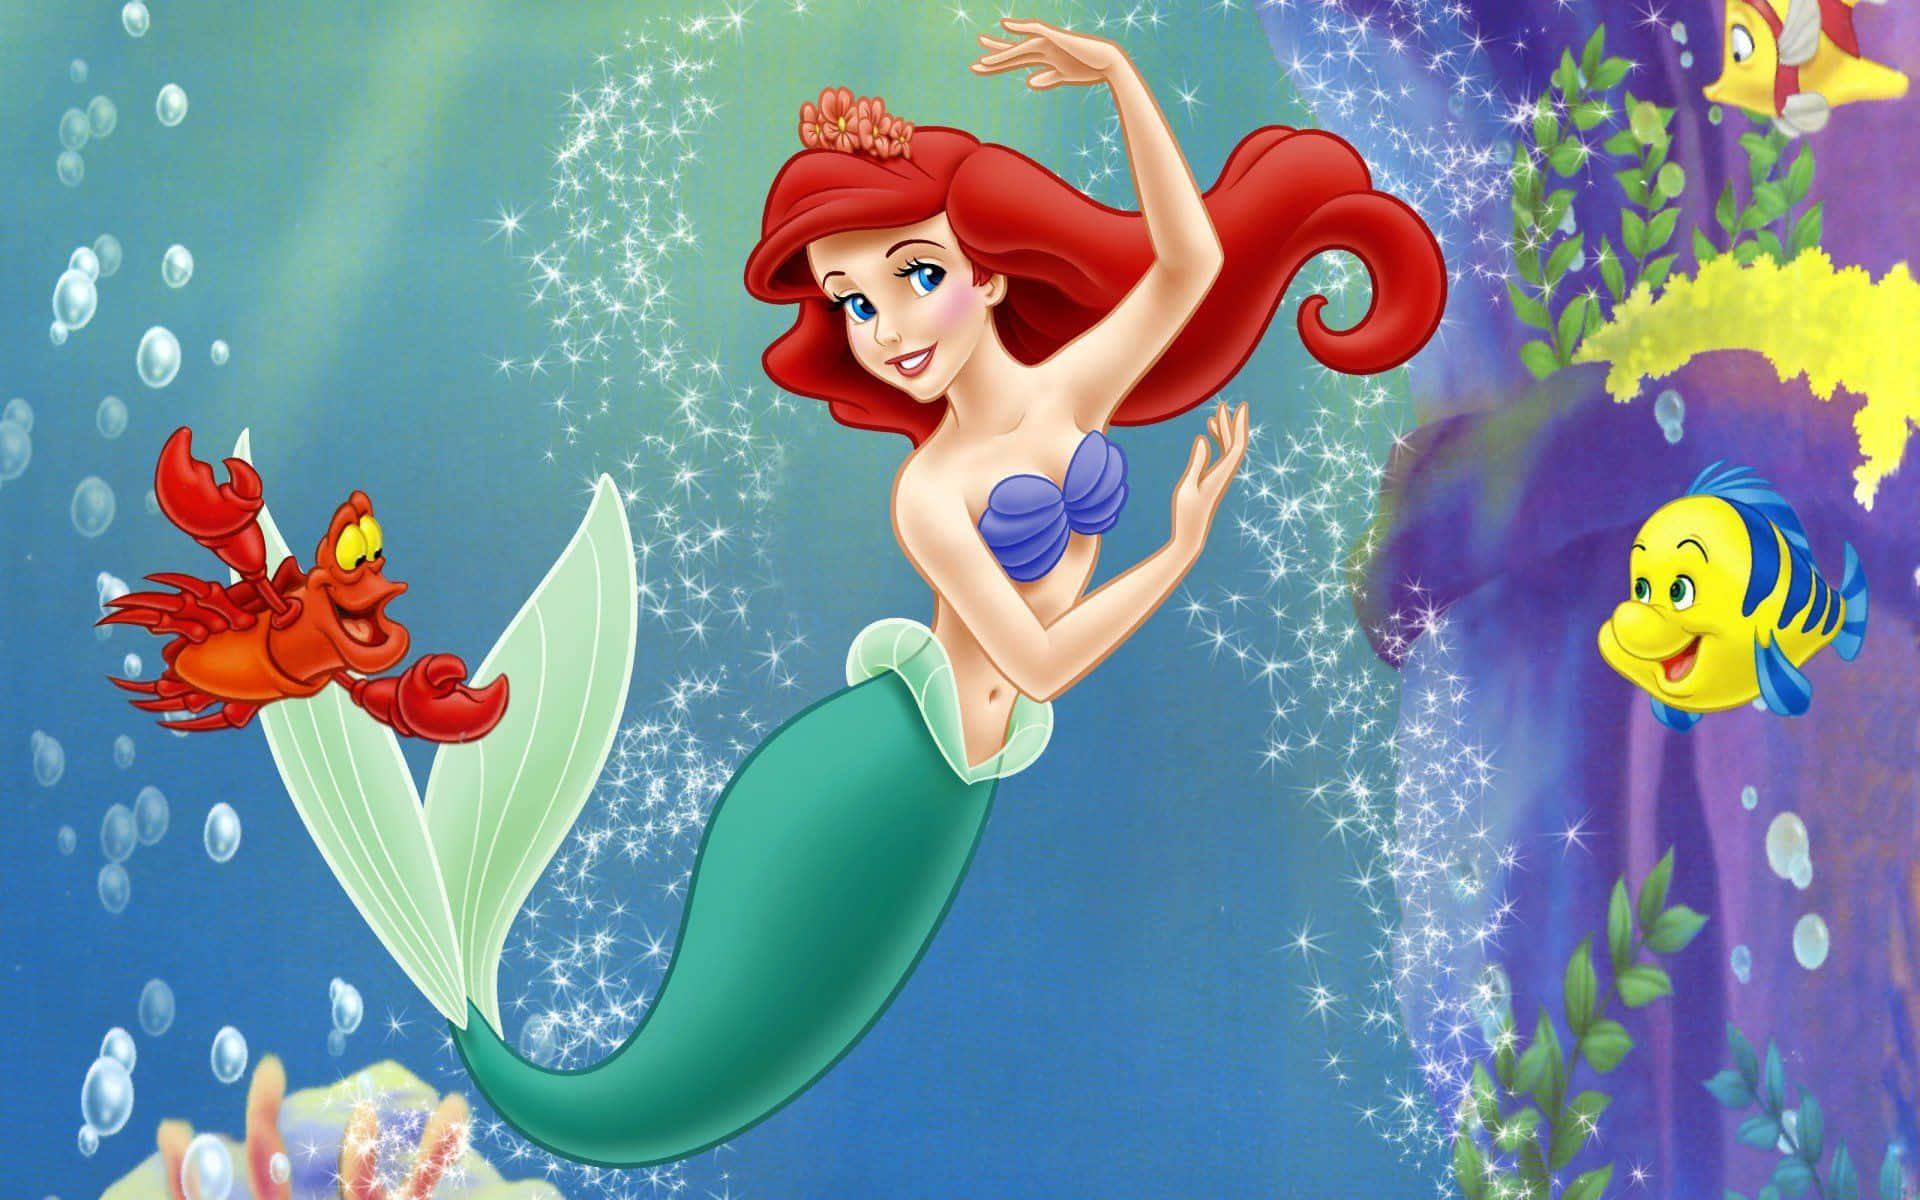 Celebrate the magic of childhood with Disney's classic 'The Little Mermaid'